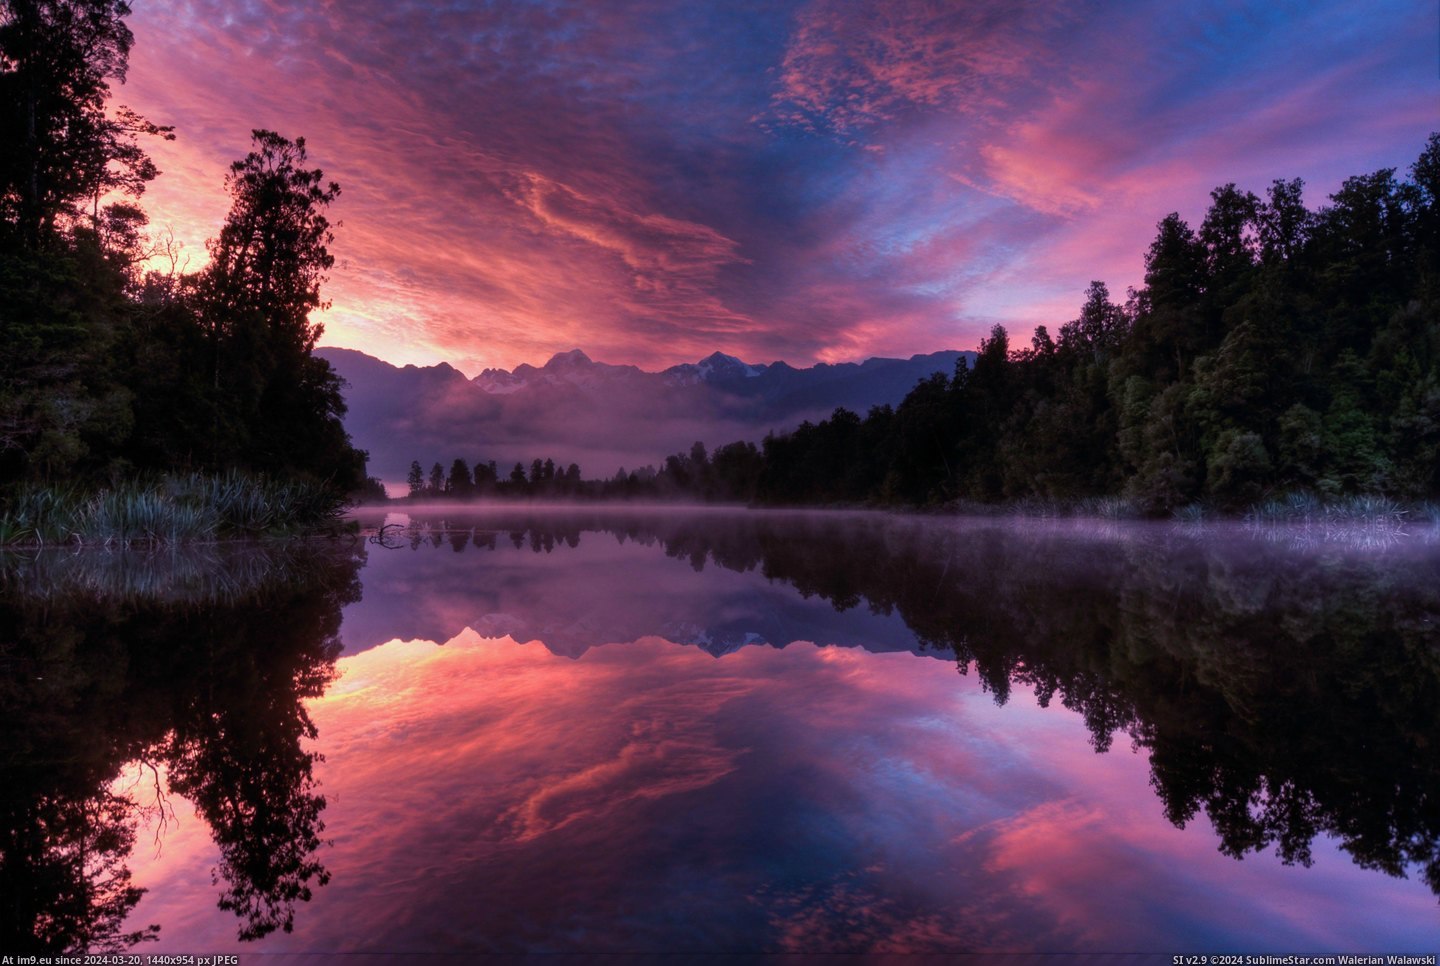 #One #Photos #Lake #Glacier #Mentioned #Fox #Zealand #Sunrise [Earthporn] Someone mentioned we need more New Zealand photos, so here's one I took at Lake Matheson near Fox Glacier at sunrise Pic. (Bild von album My r/EARTHPORN favs))